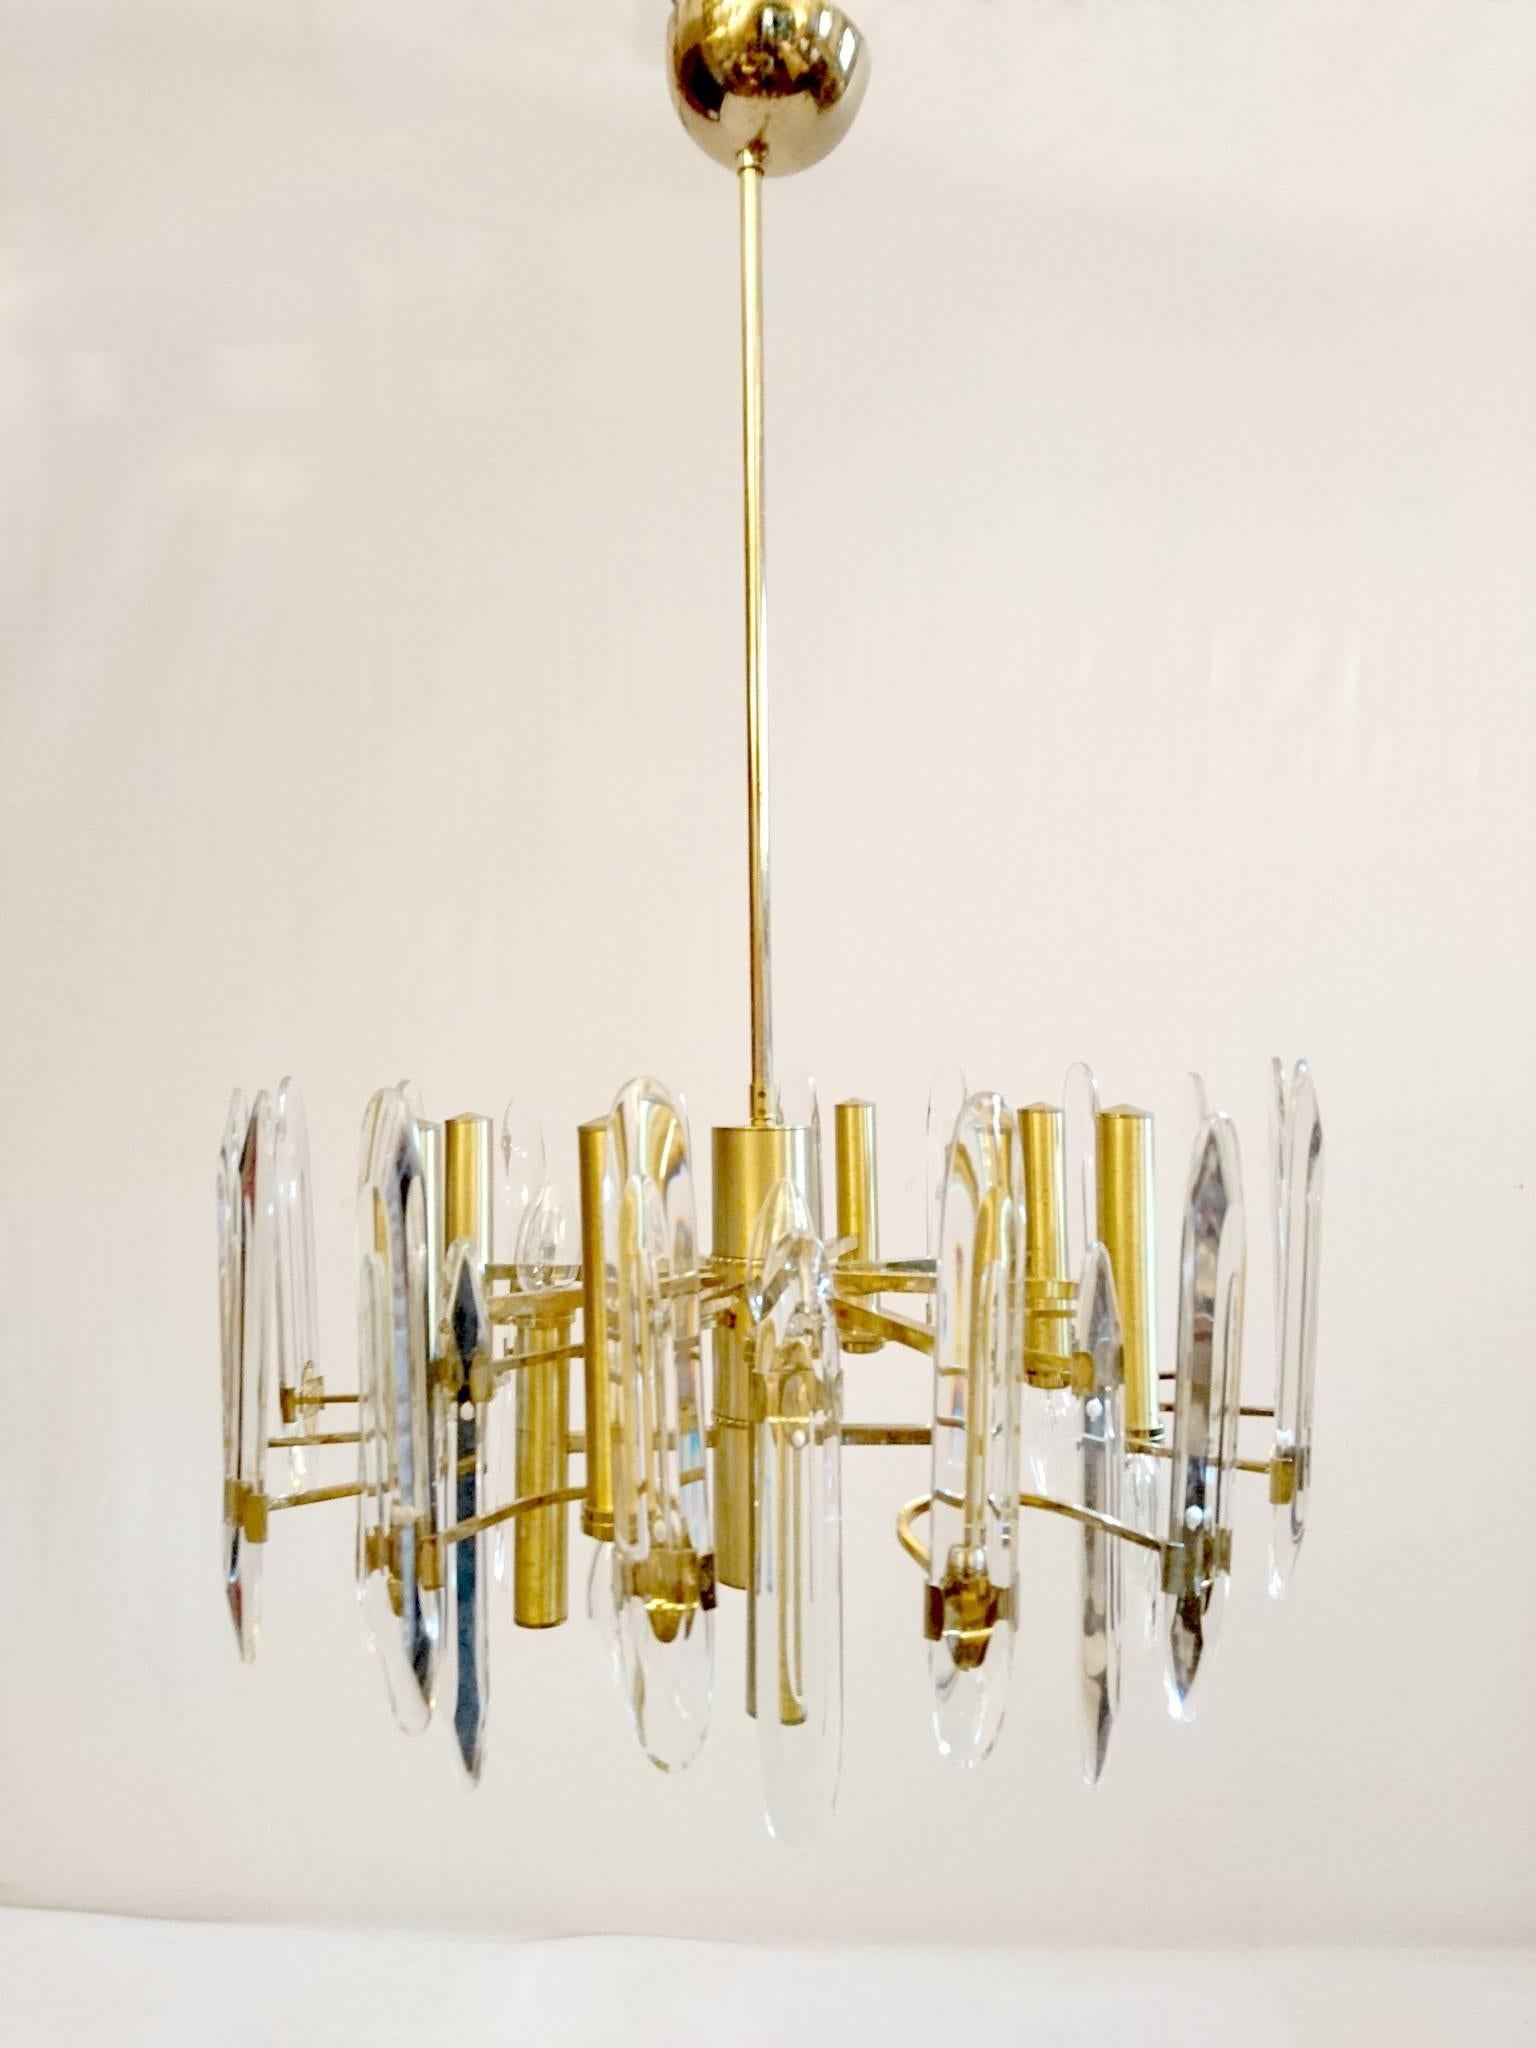 Chandelier in Classic Sciolari design in brass and crystal glass. Has 12 lights and comes with two extra spare crystal pieces. For a small sum the height can be adjusted to required height if needed.